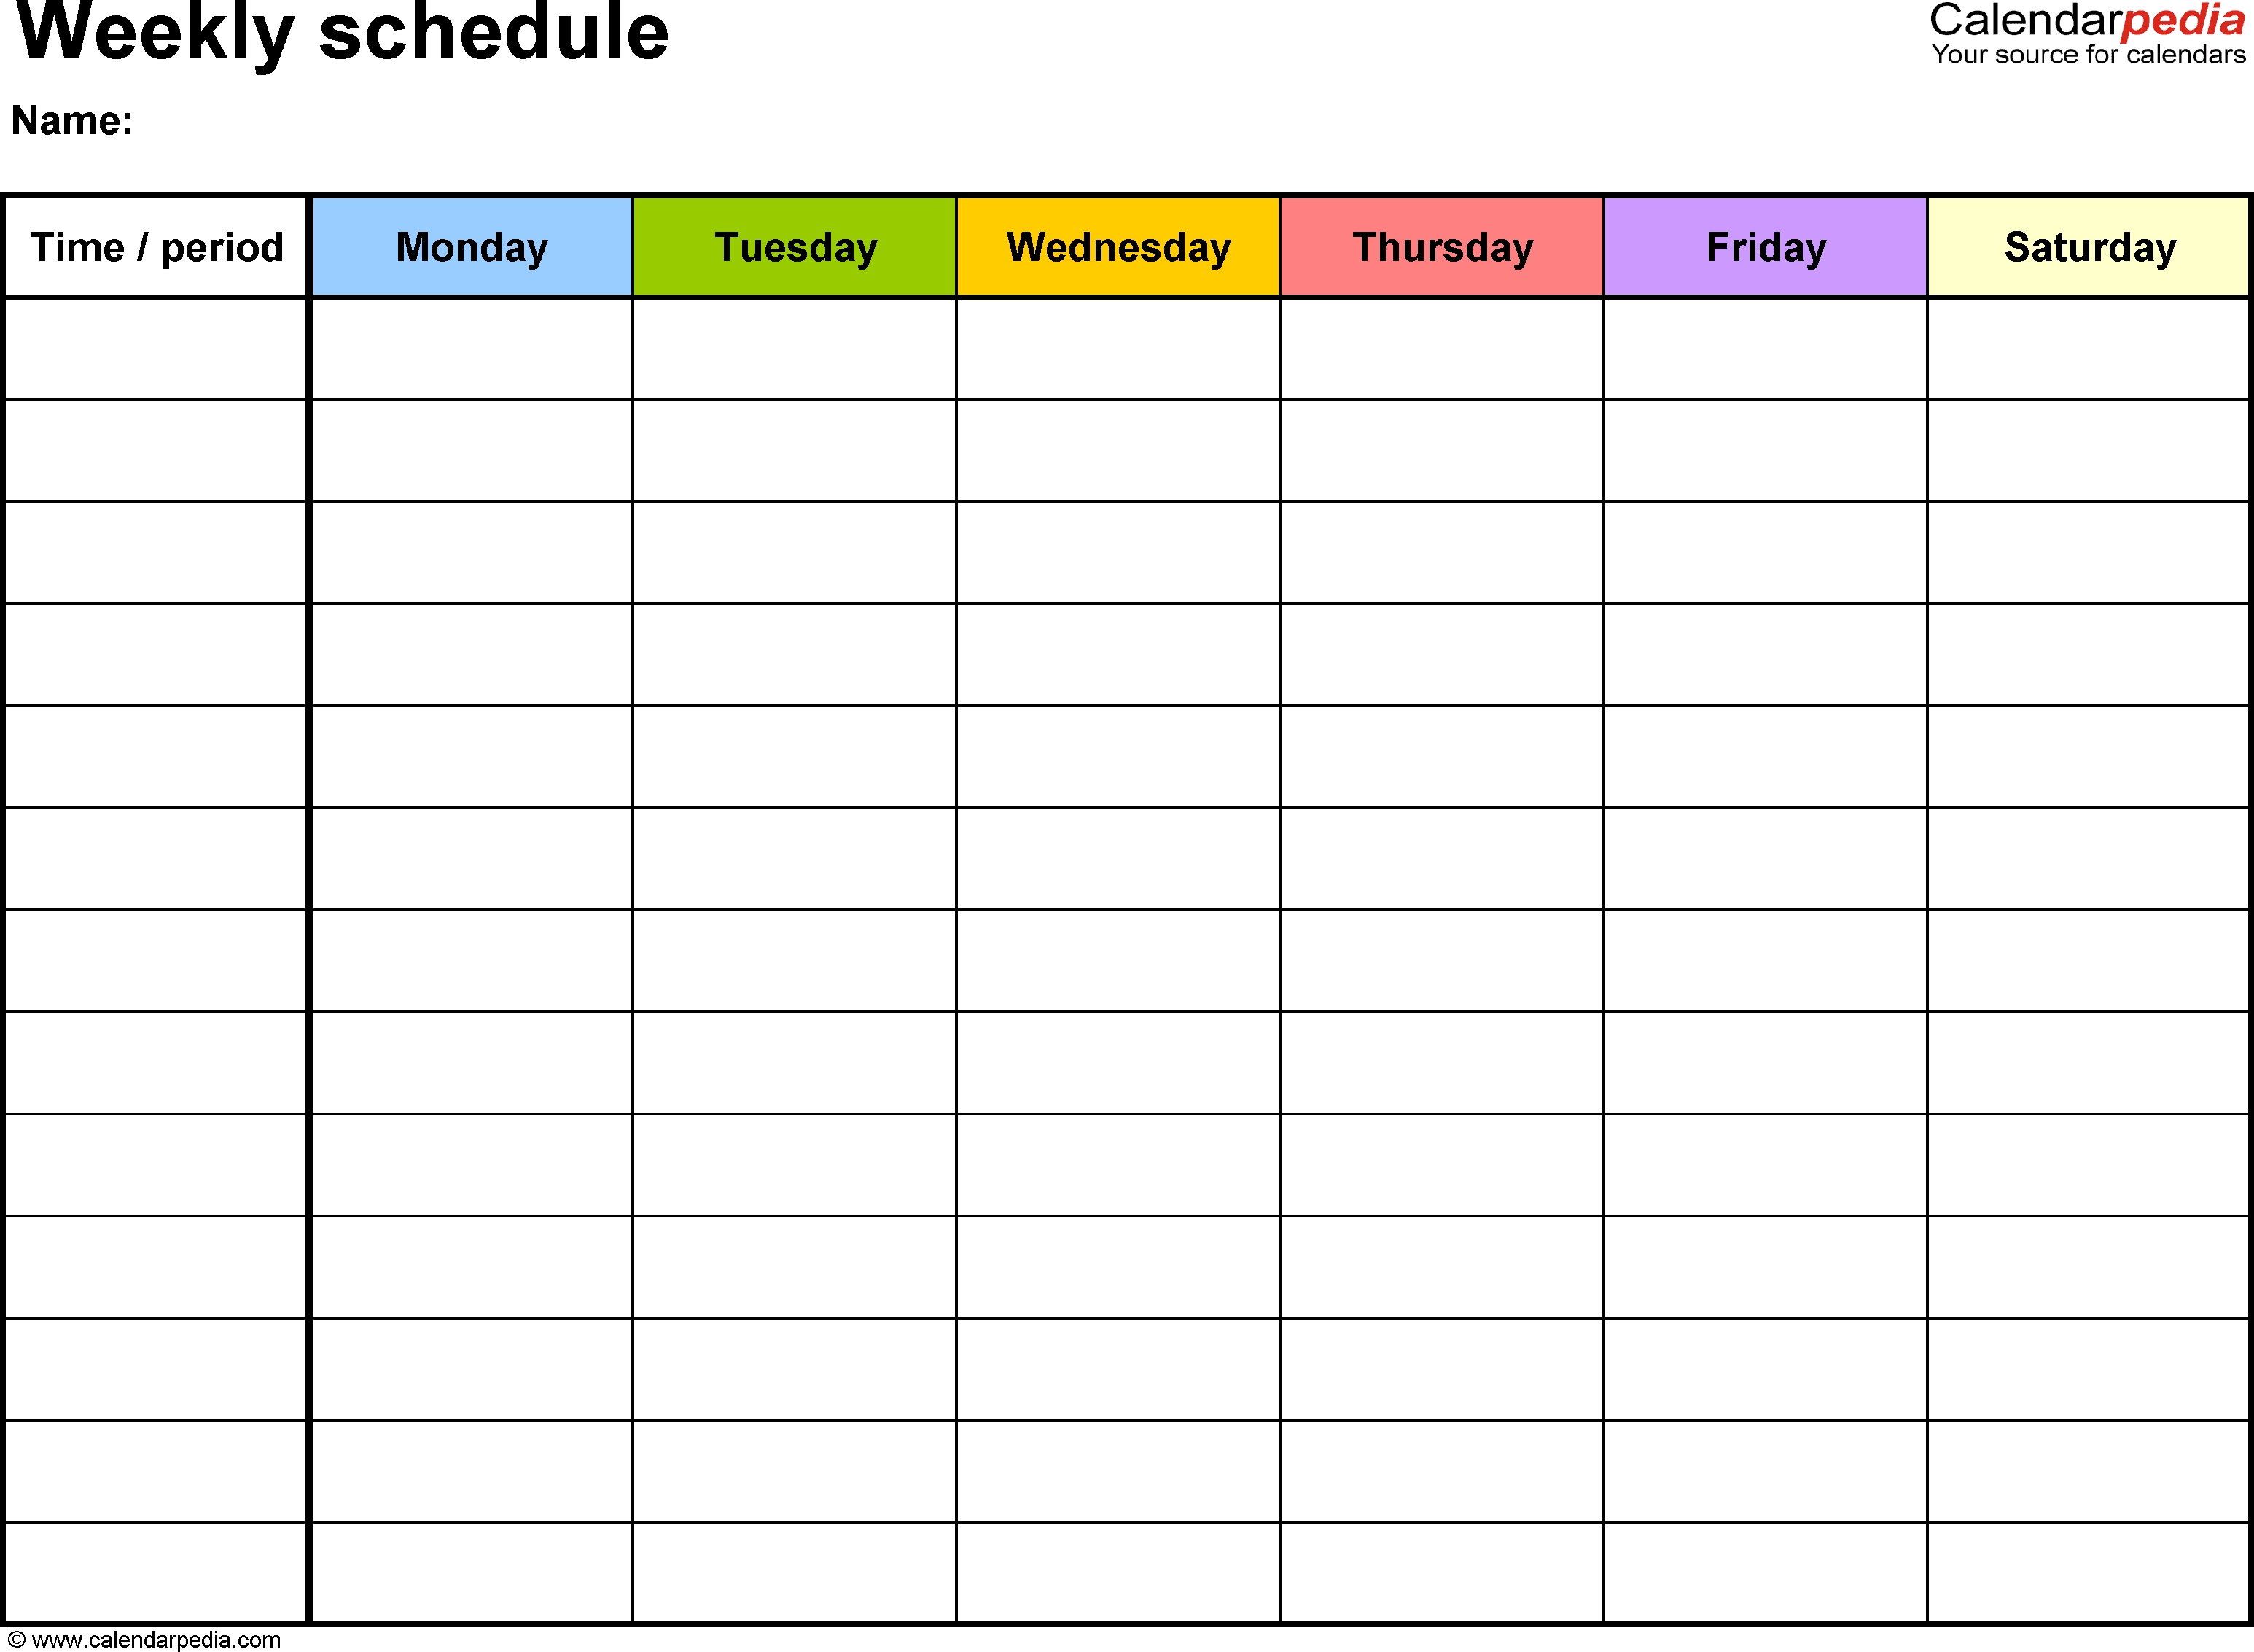 Free Weekly Schedule Templates For Word - 18 Templates inside Printable Monday Through Friday Calendar